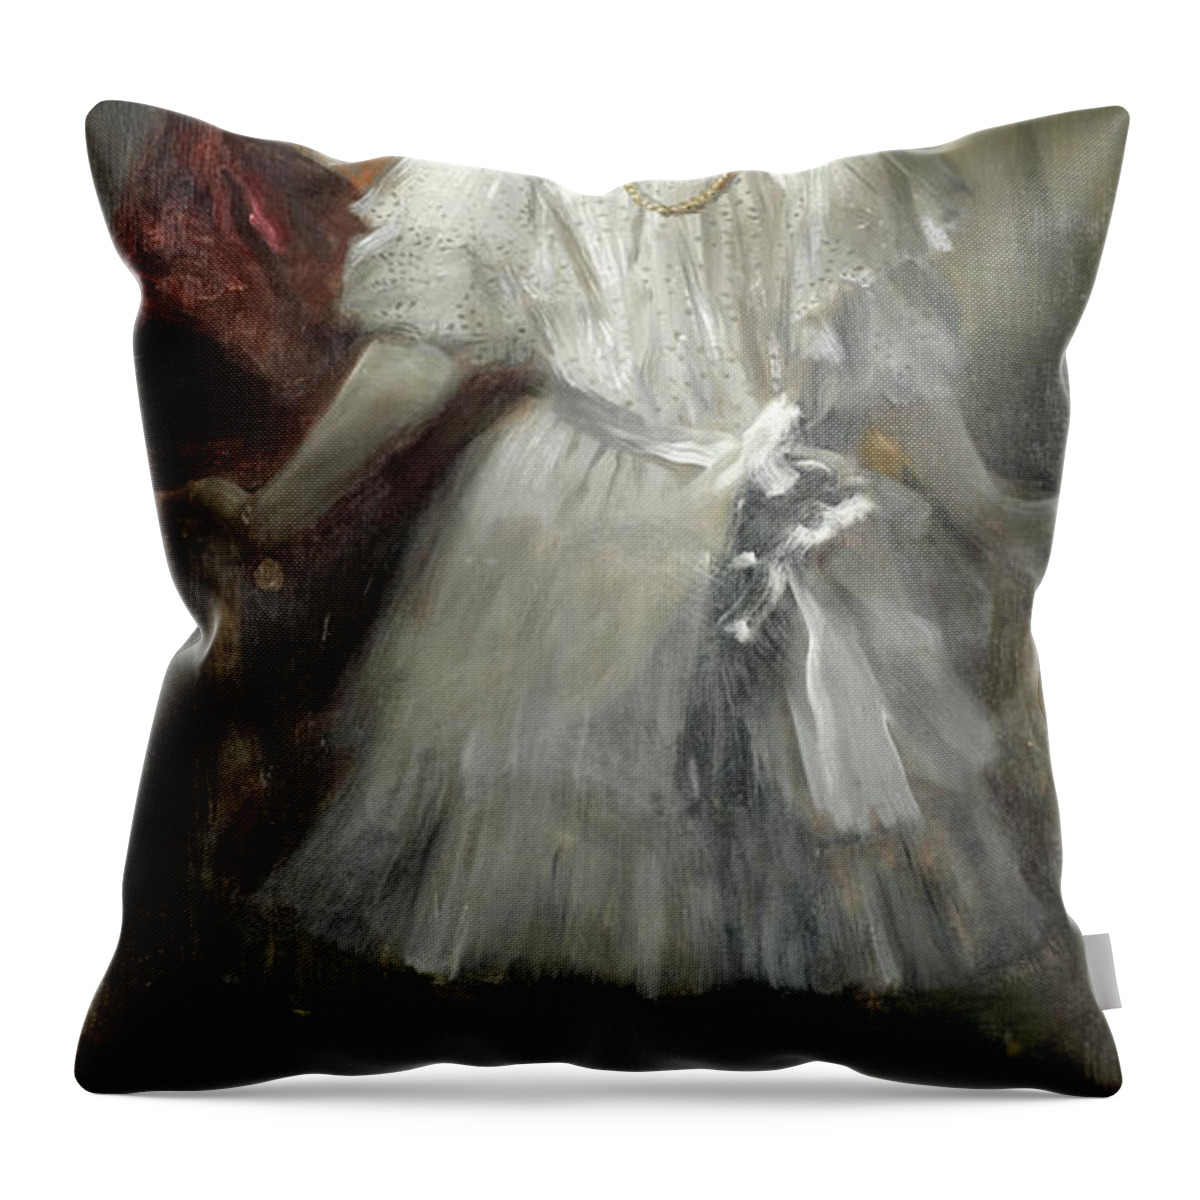 Jose Villegas Y Cordero Throw Pillow featuring the painting Portrait of Caridad Fe y Alba by Jose Villegas y Cordero